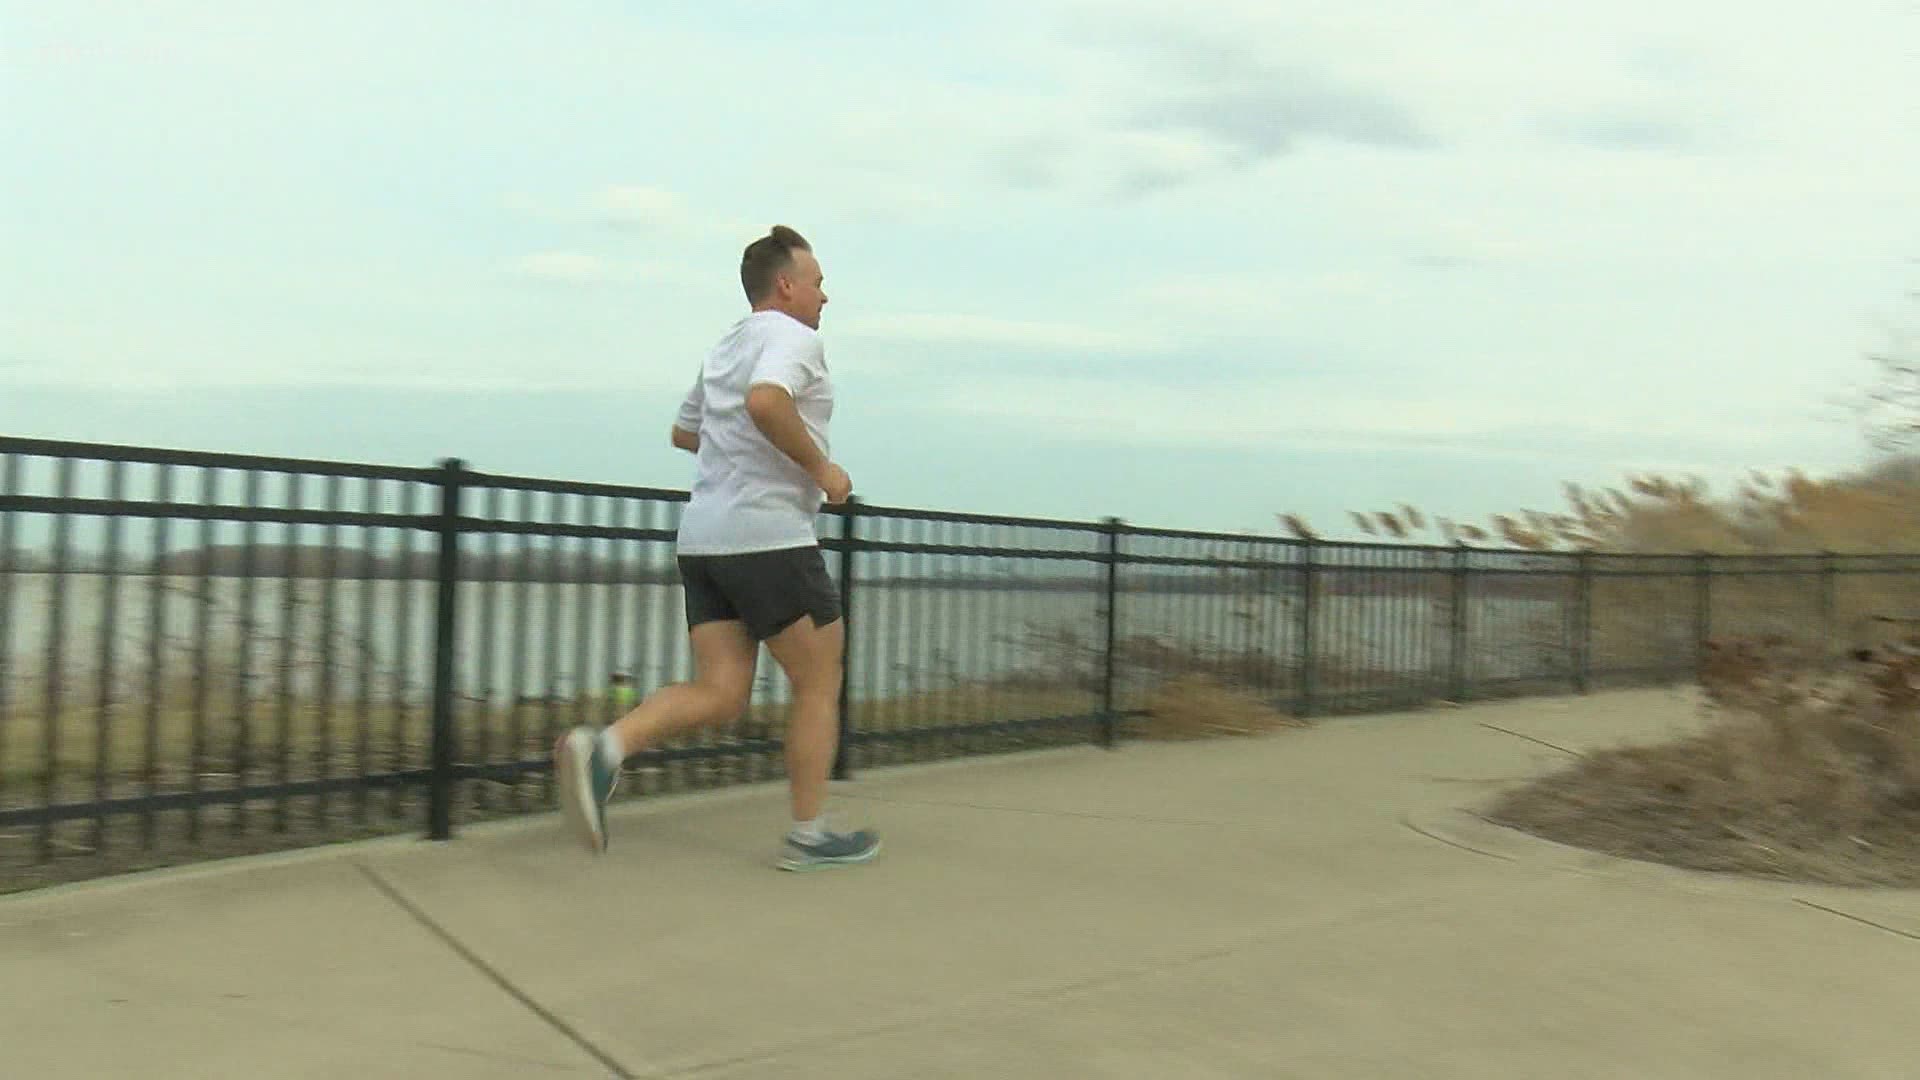 Jesse Squire plans to run in every Toledo park this year, over 200 of them. He says running has helped him appreciate his city and revealed many other life lessons.